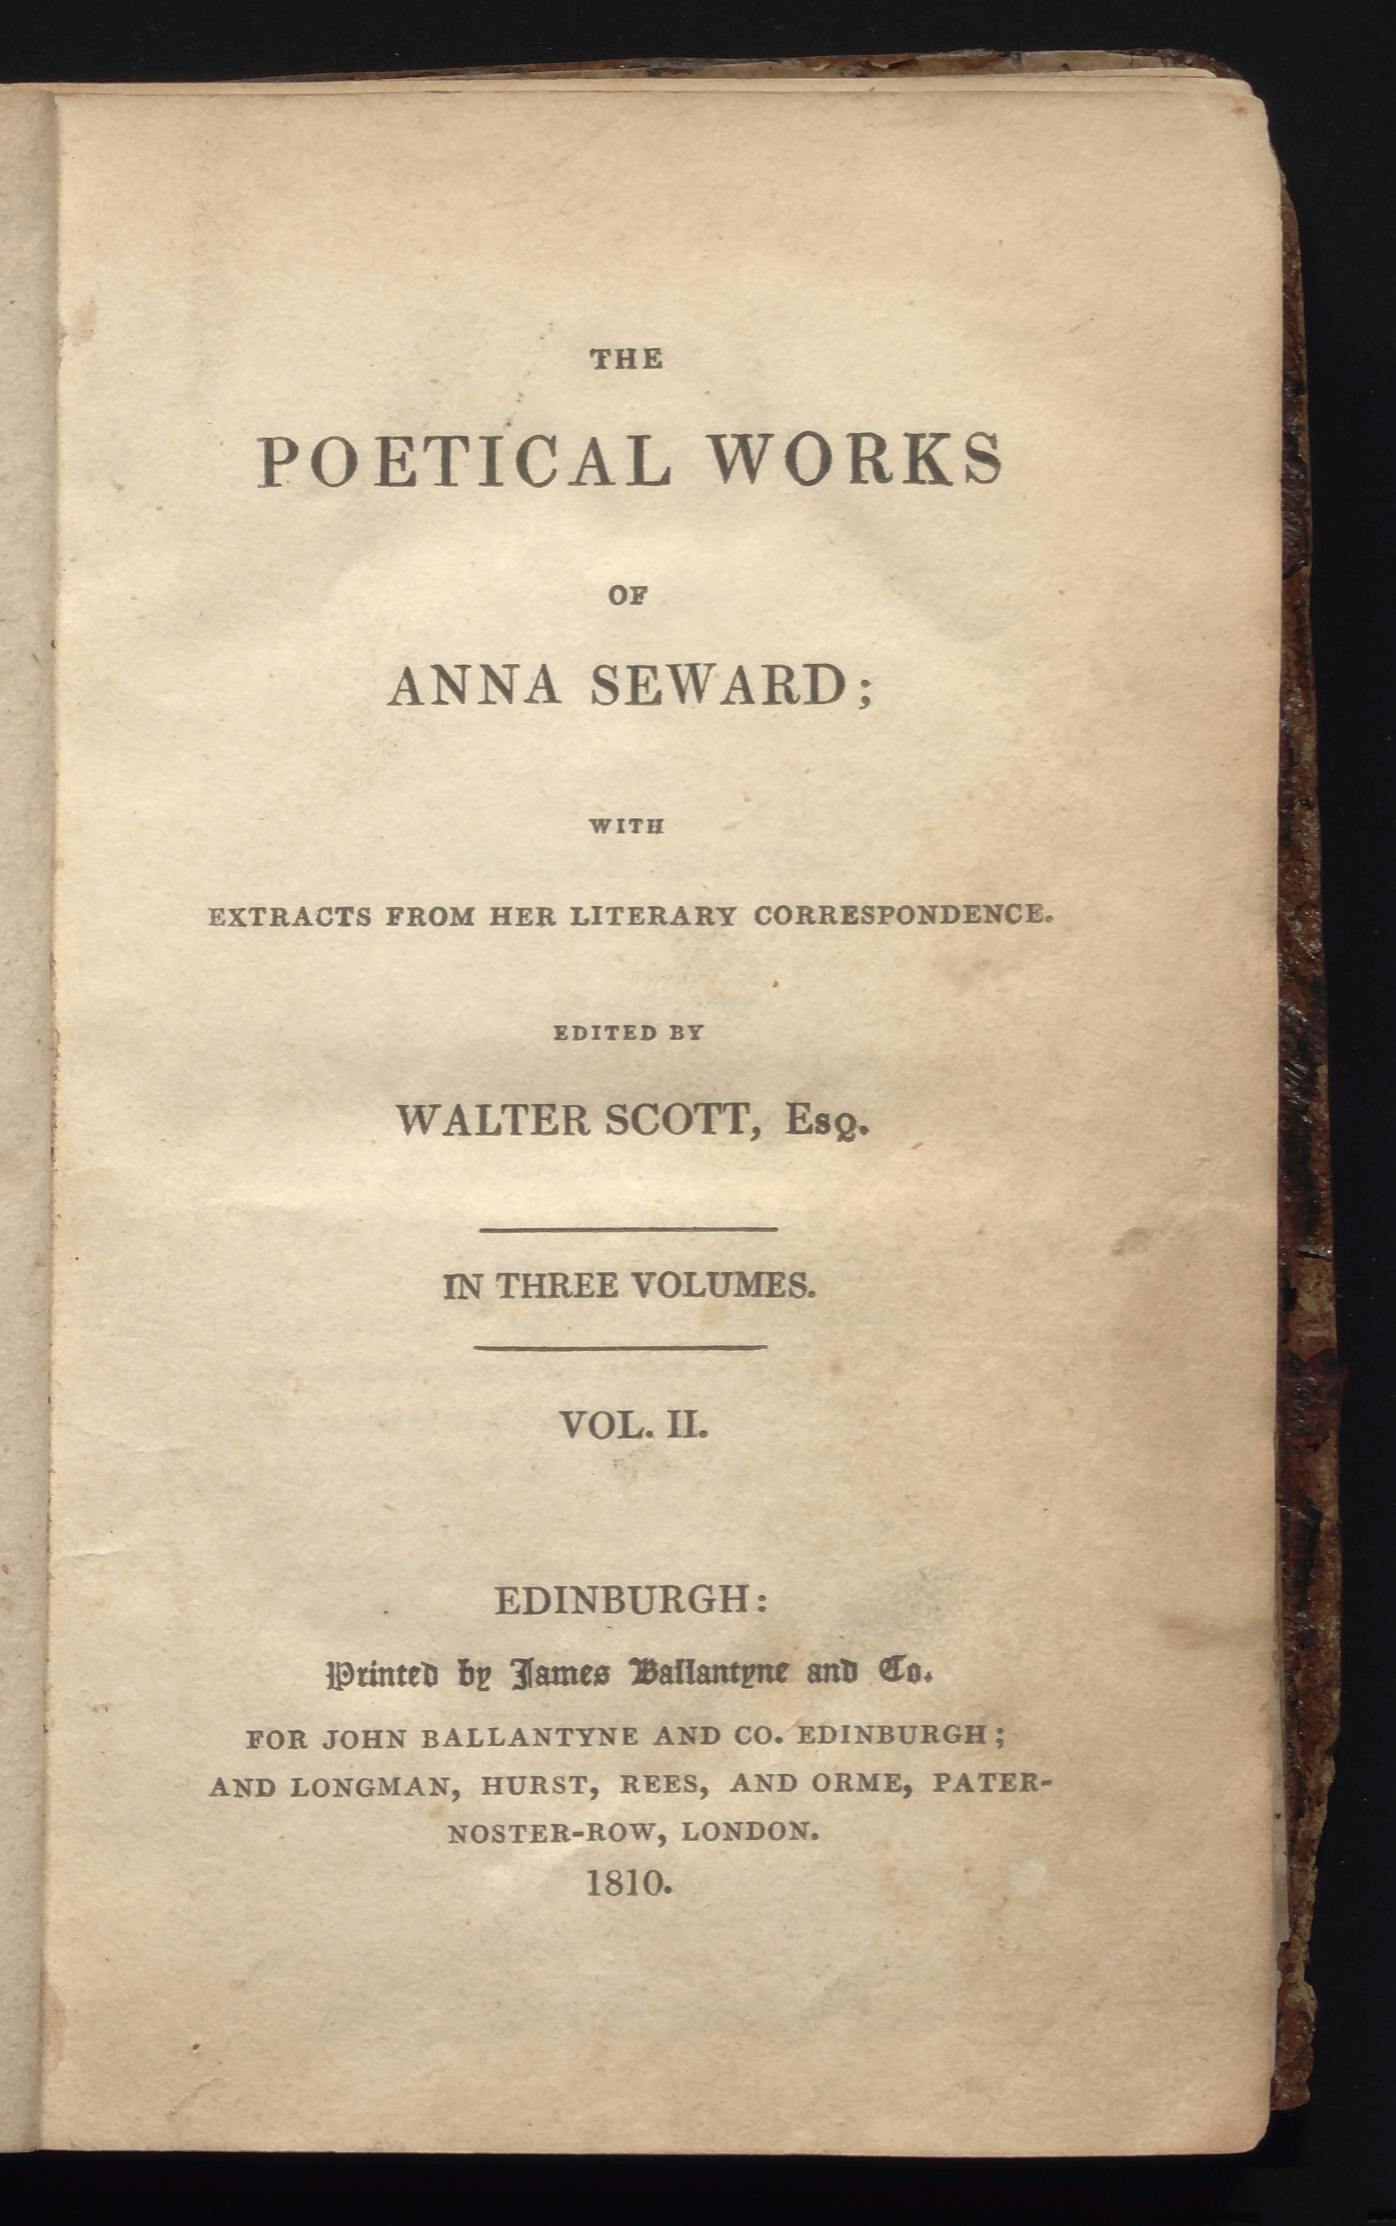 “Epistle to Colonel St. George” in The poetical works of Anna Seward; with extracts from her literary correspondence, Vol. II